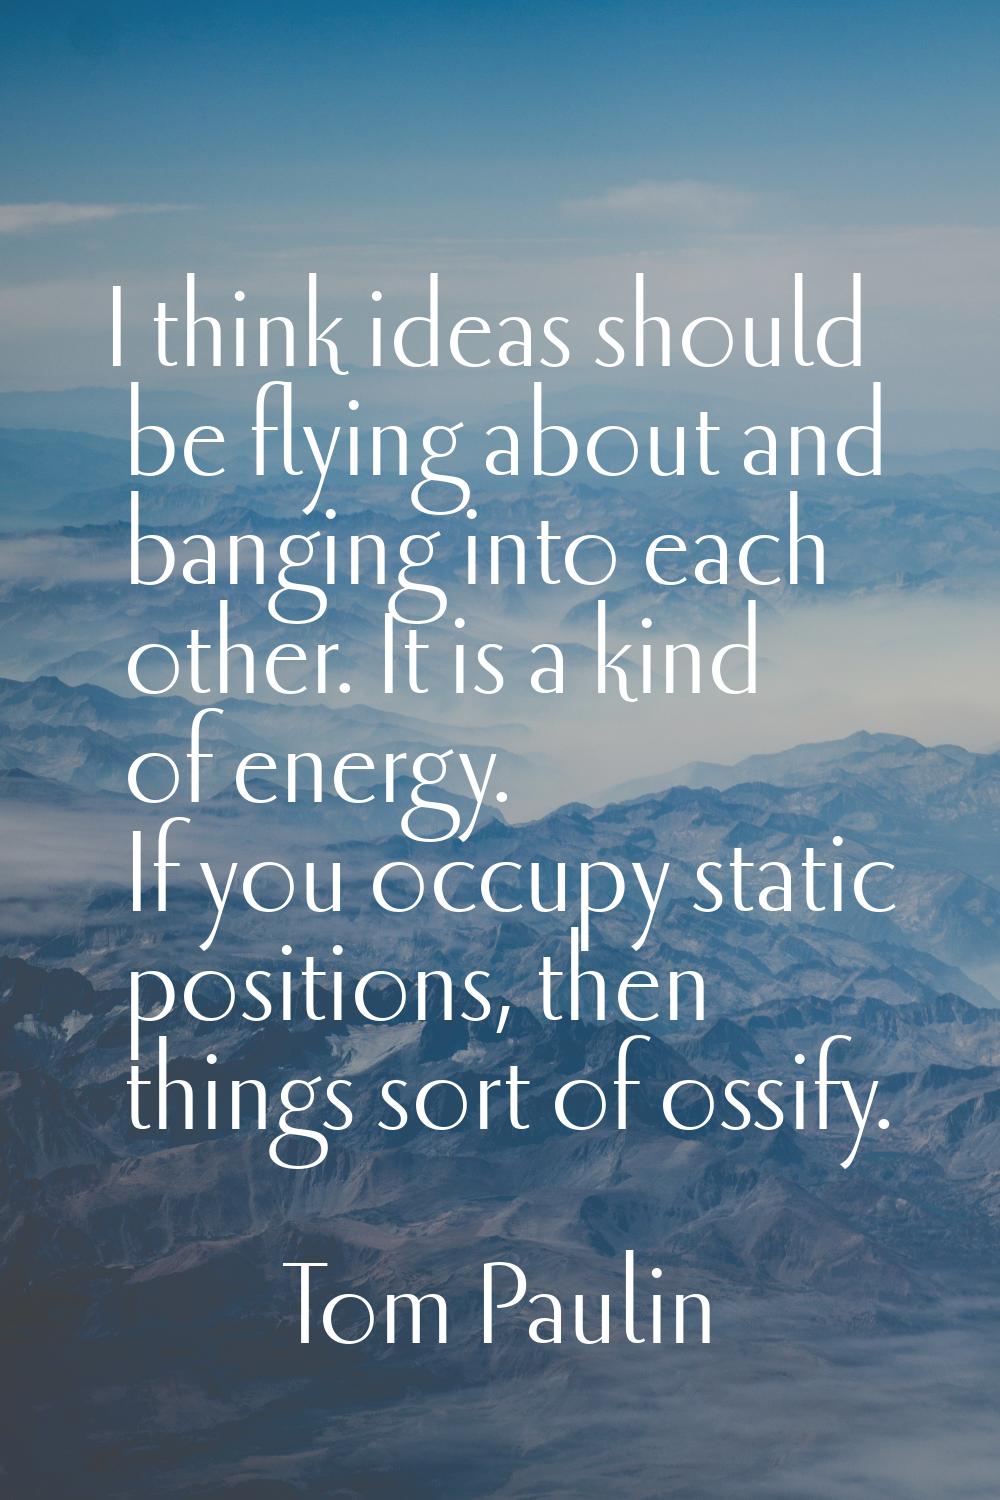 I think ideas should be flying about and banging into each other. It is a kind of energy. If you oc